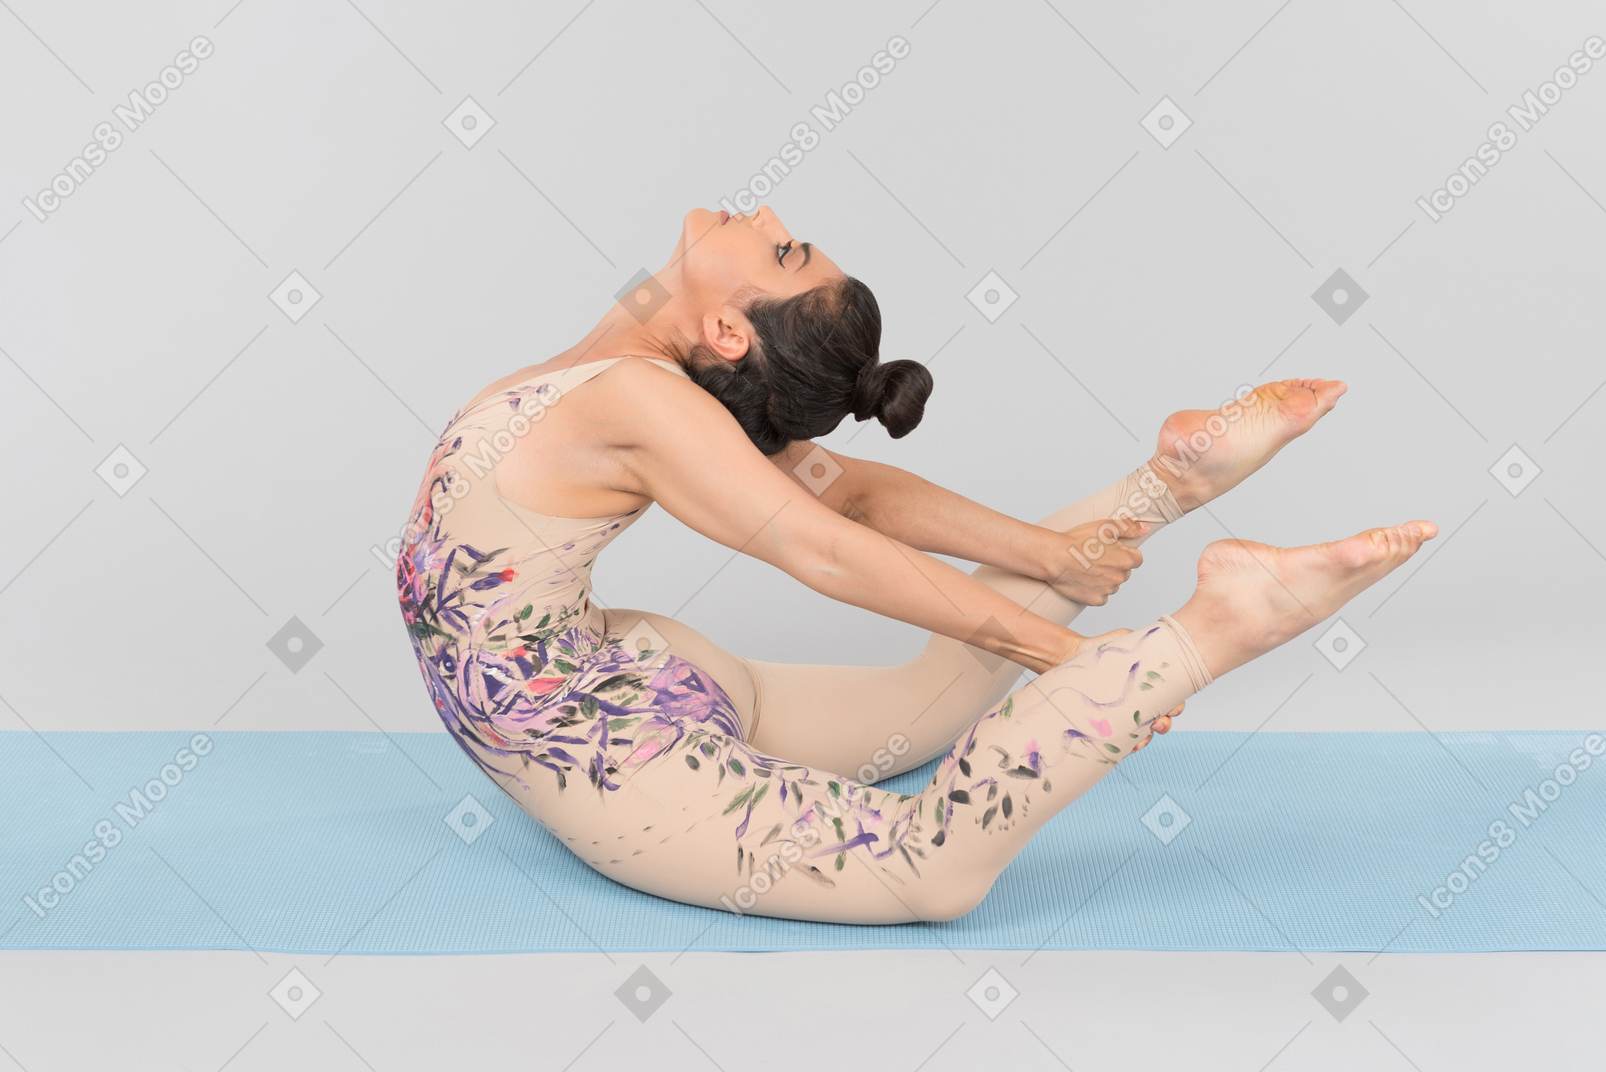 Young indian gymnast sitting on yoga mat